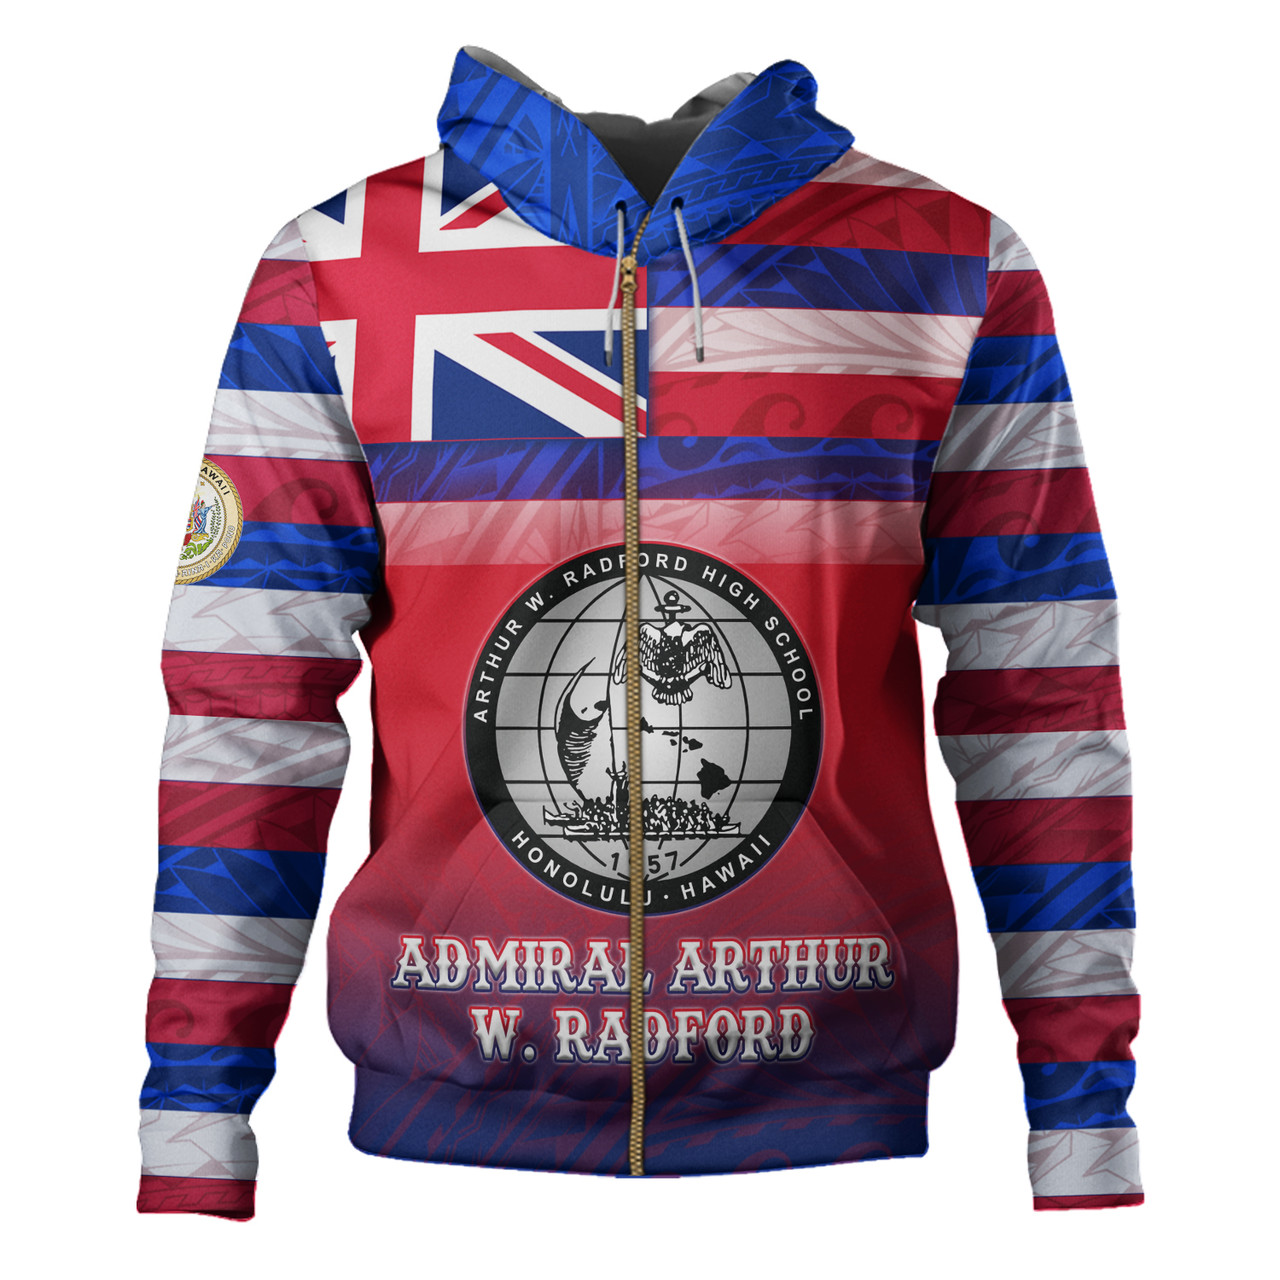 Hawaii Admiral Arthur W. Radford High School Hoodie Flag Color With Traditional Patterns